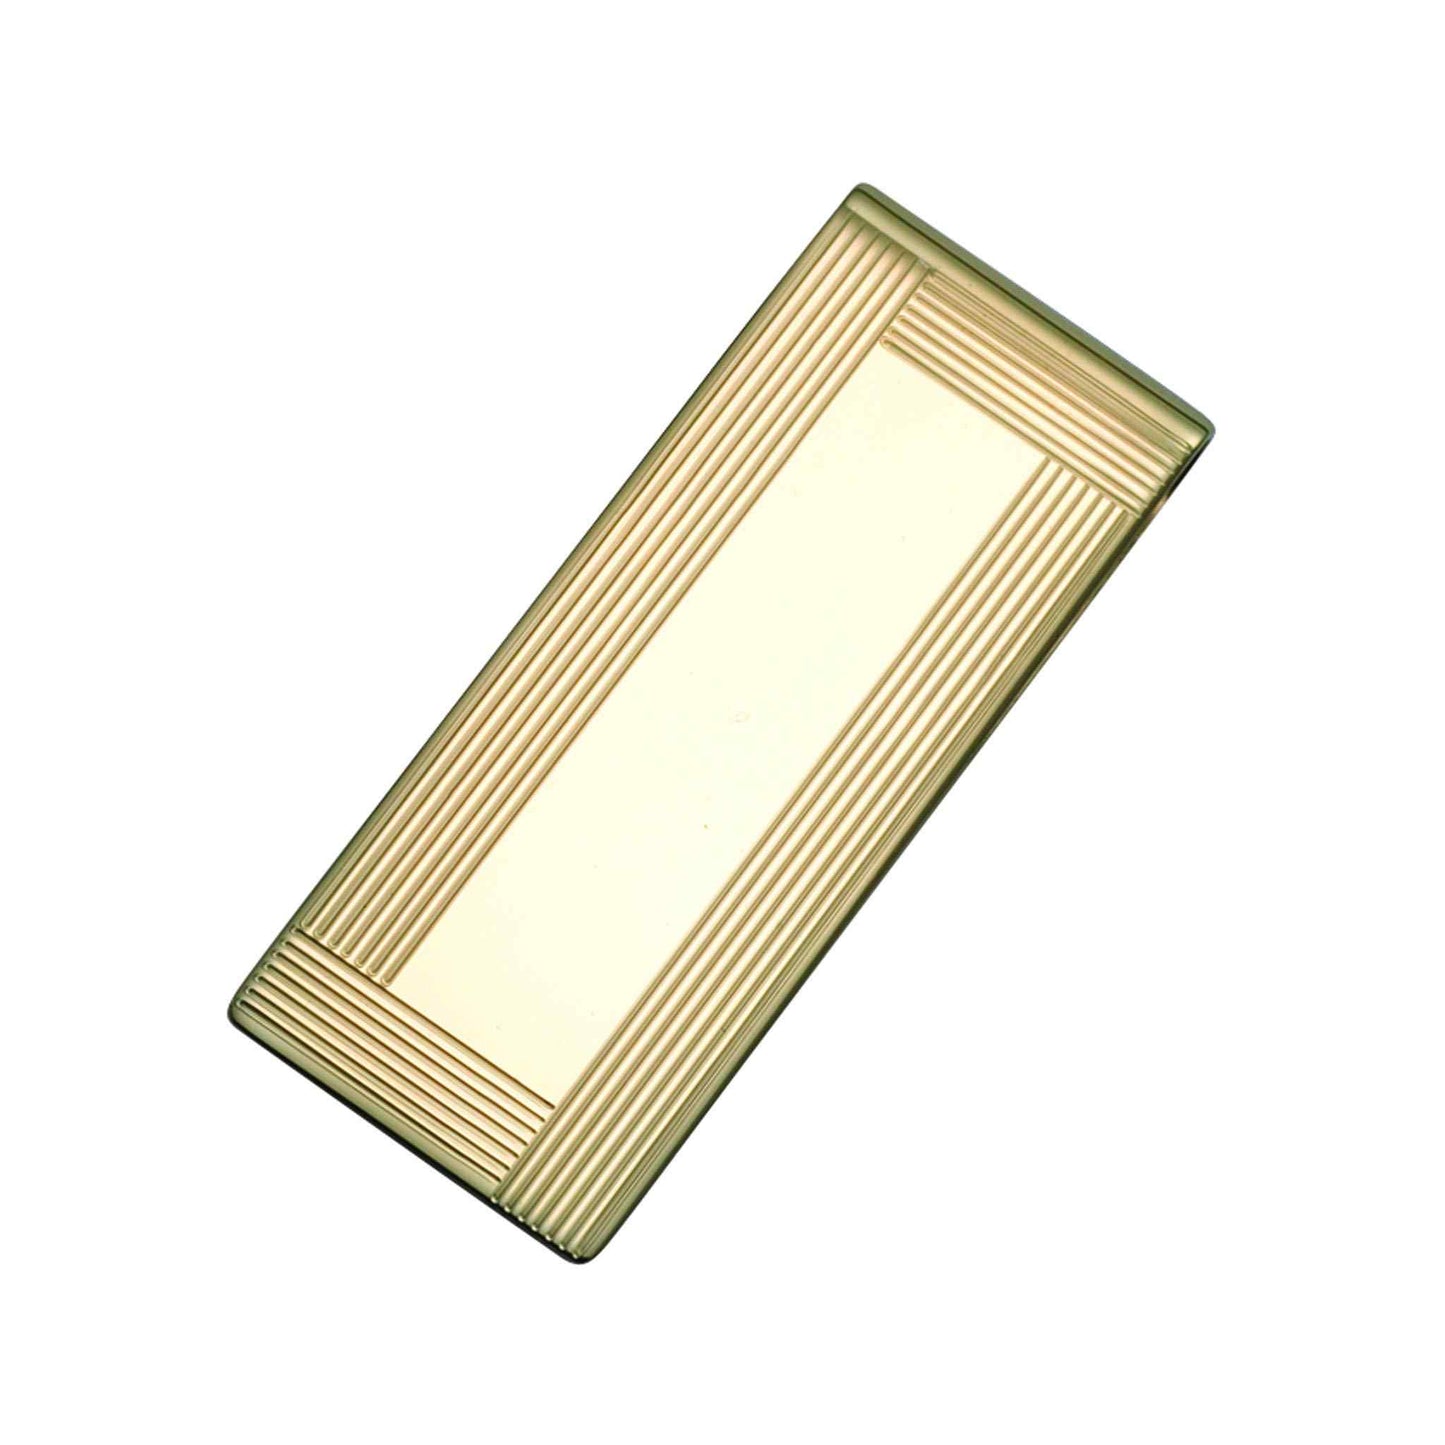 A 14k yellow gold 3/4" etched 4-way money clip displayed on a neutral white background.